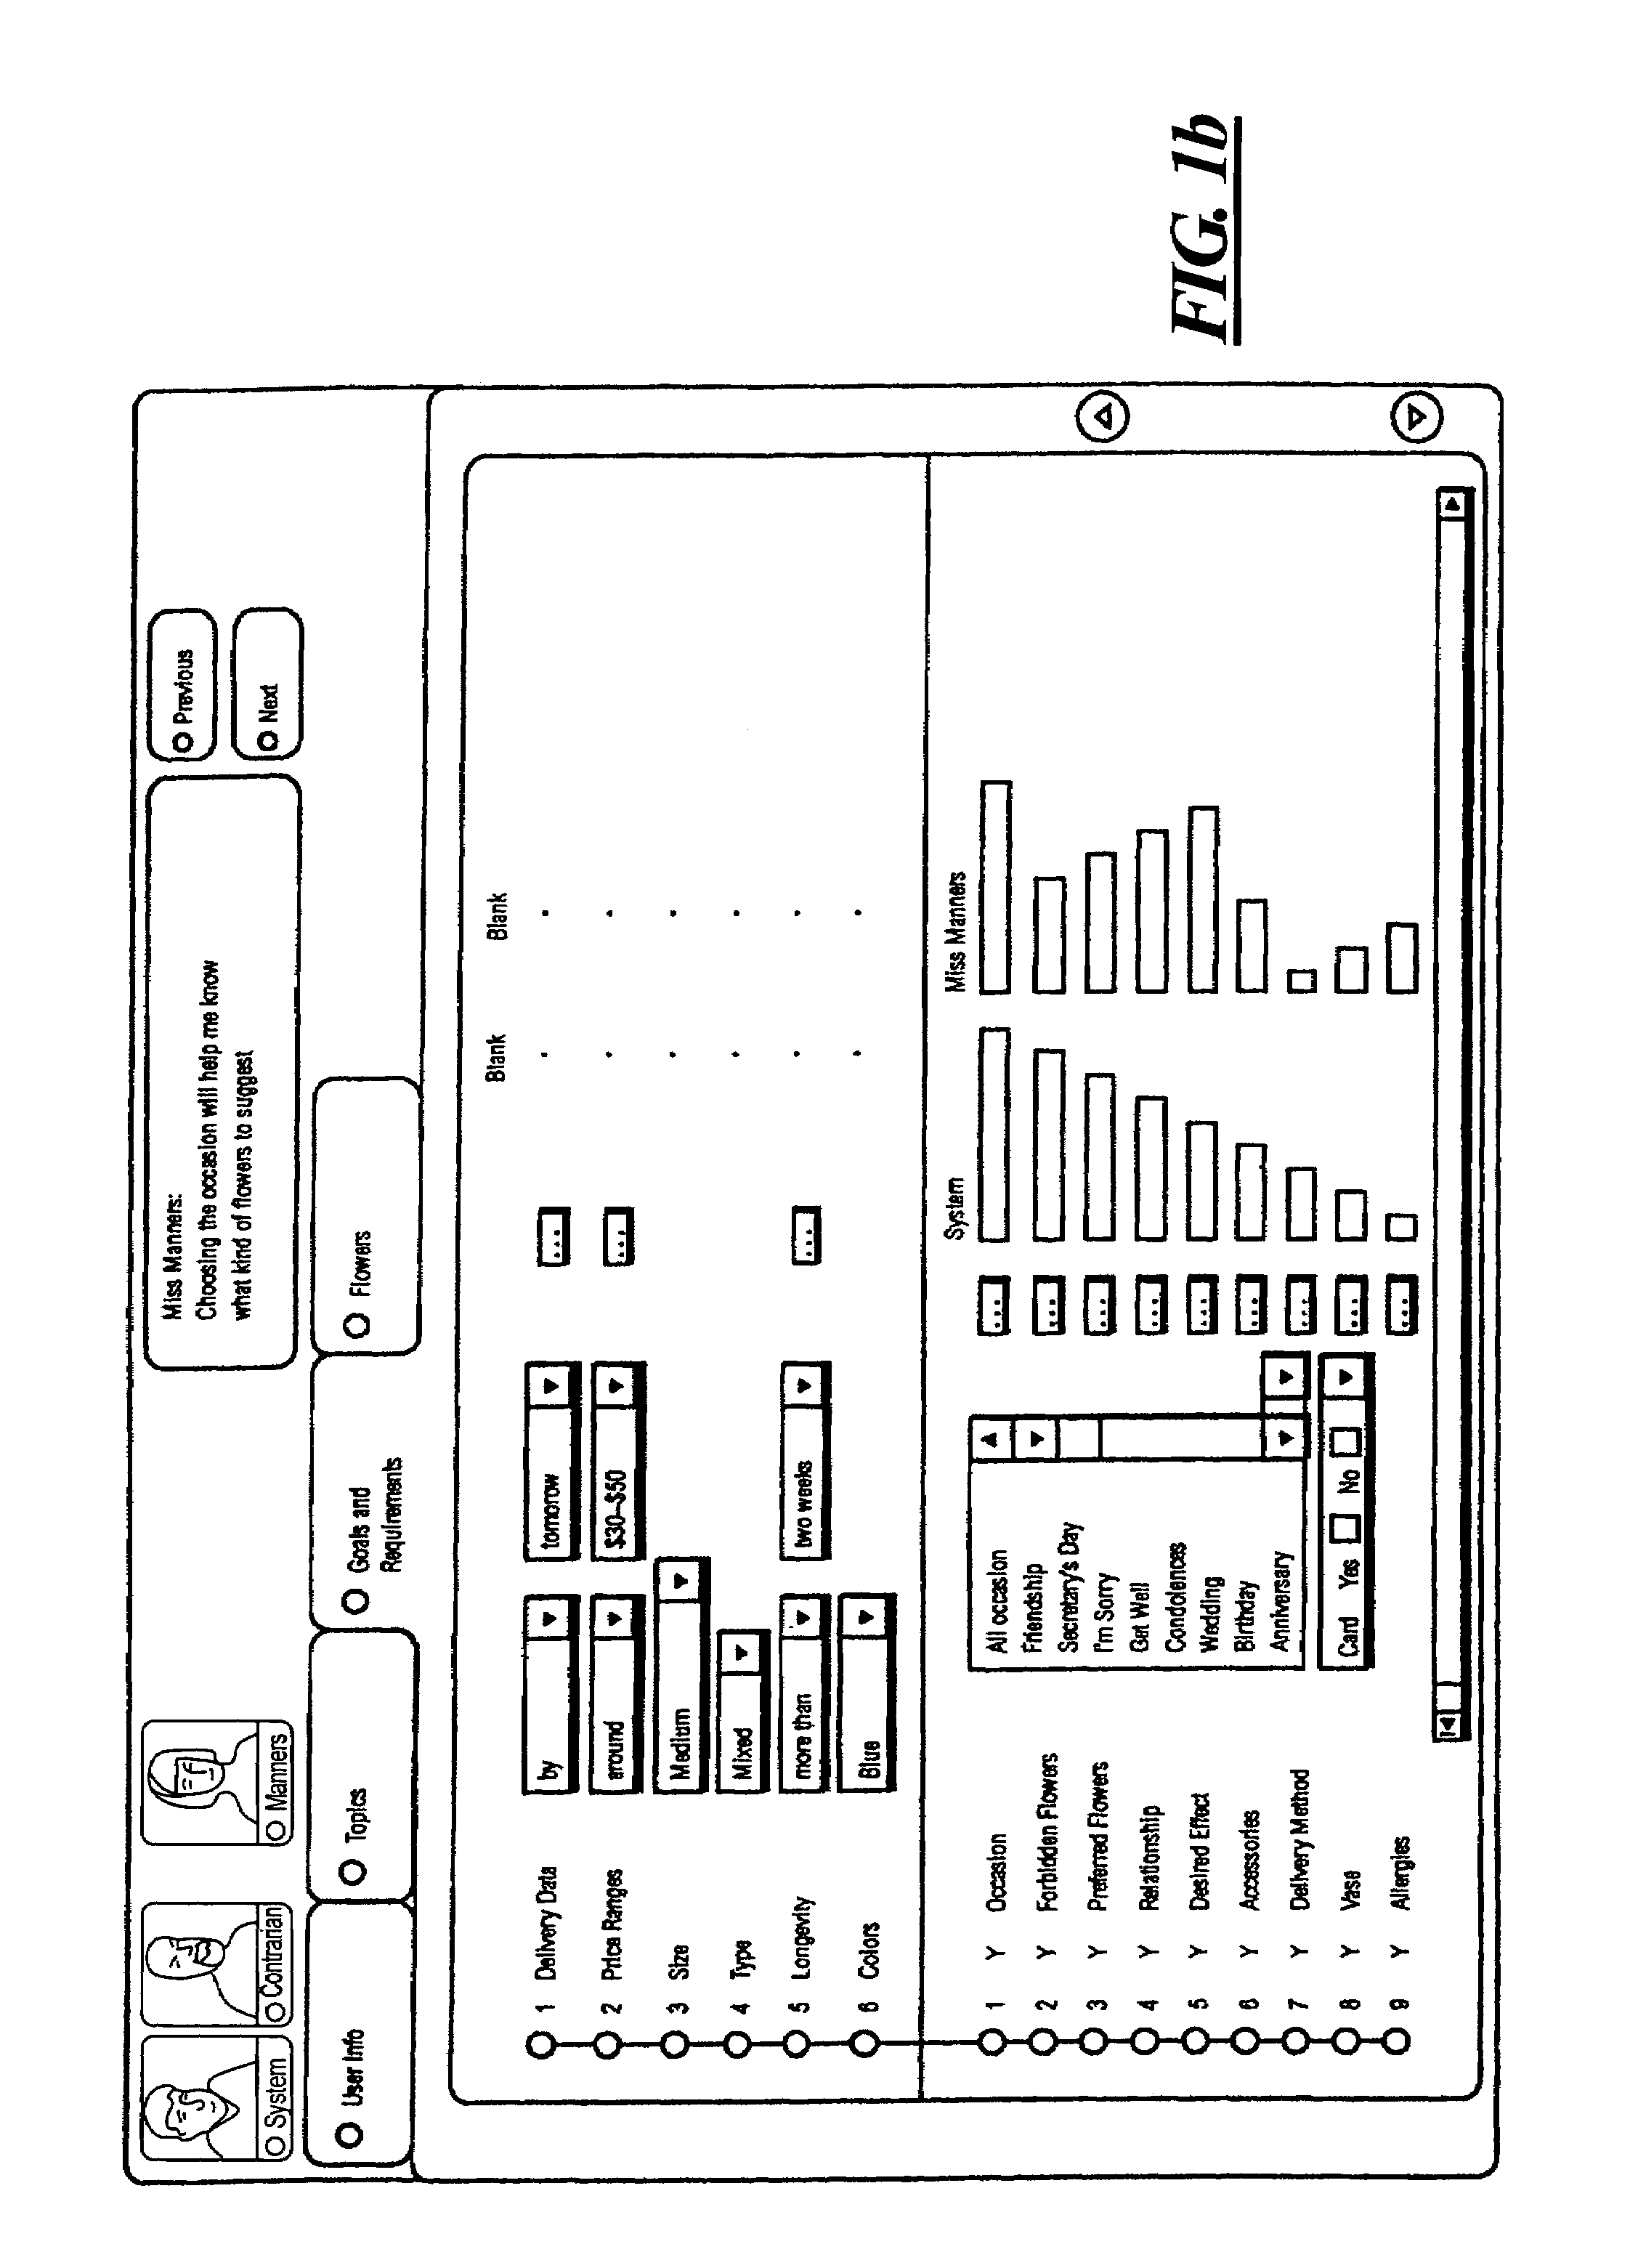 Apparatus and methods for a computer-aided decision-making system